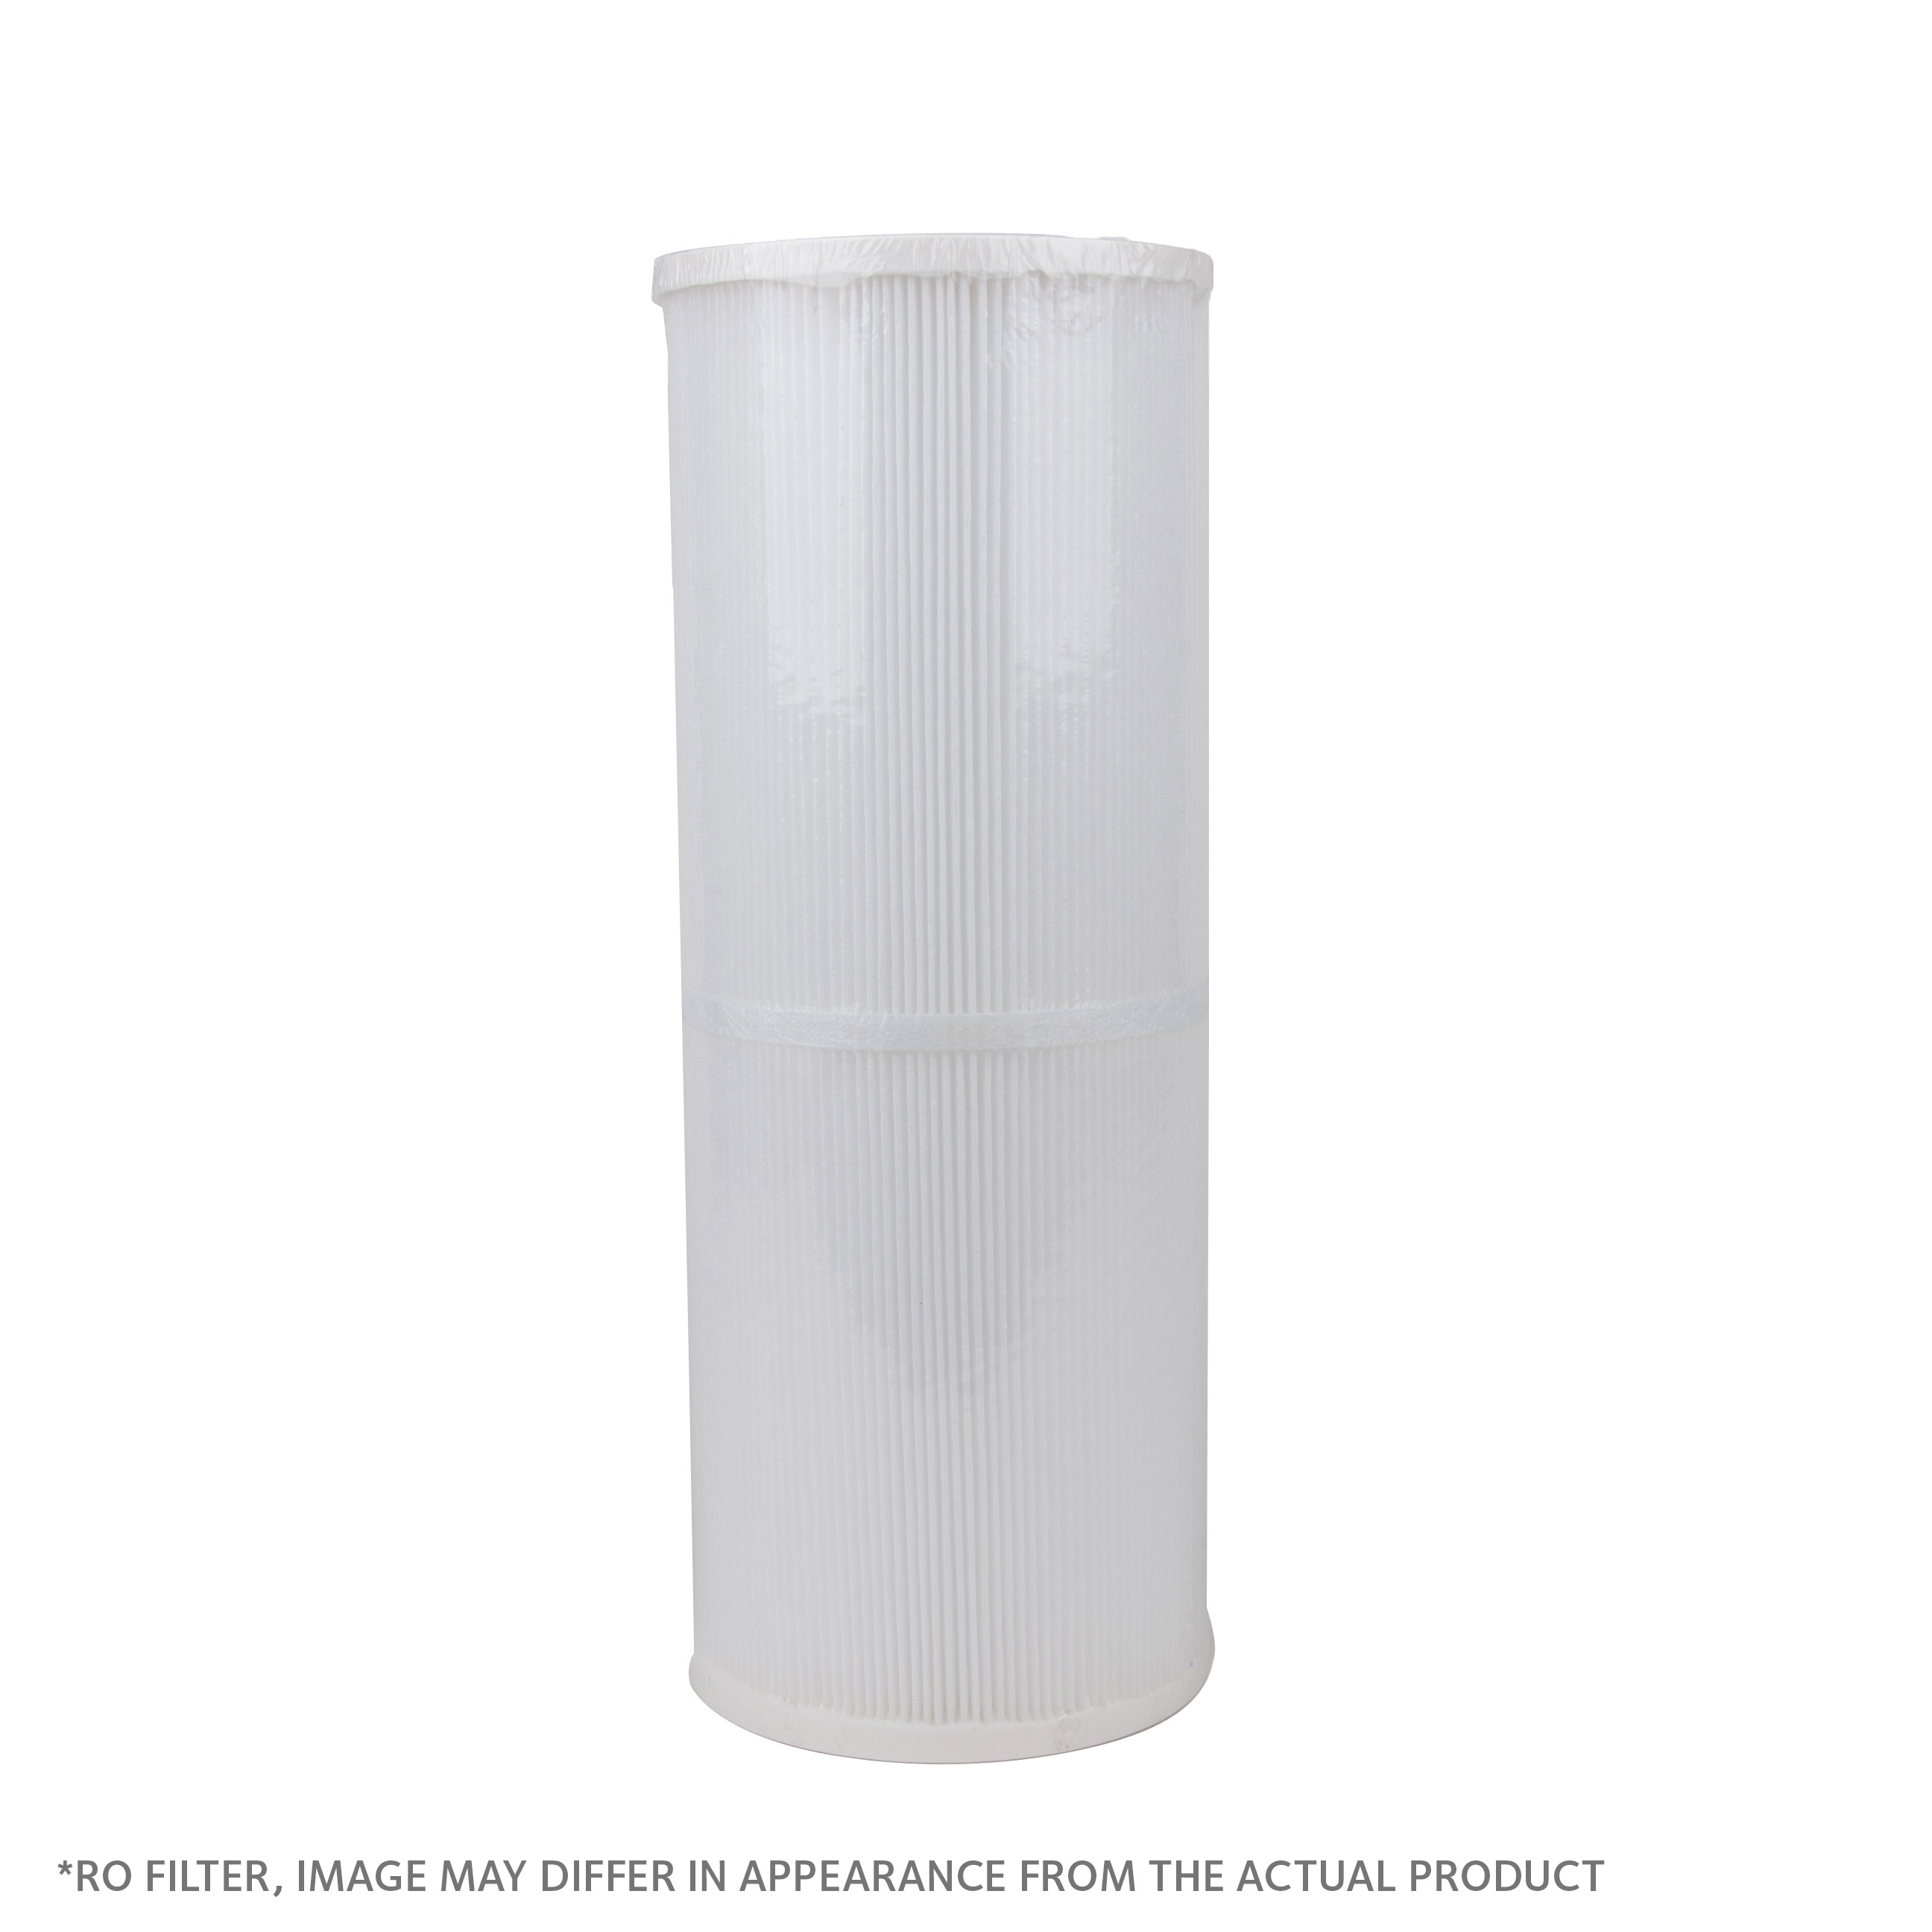 801061657 Filter, Pleated, 5 MIC, 12.0&quot; LG